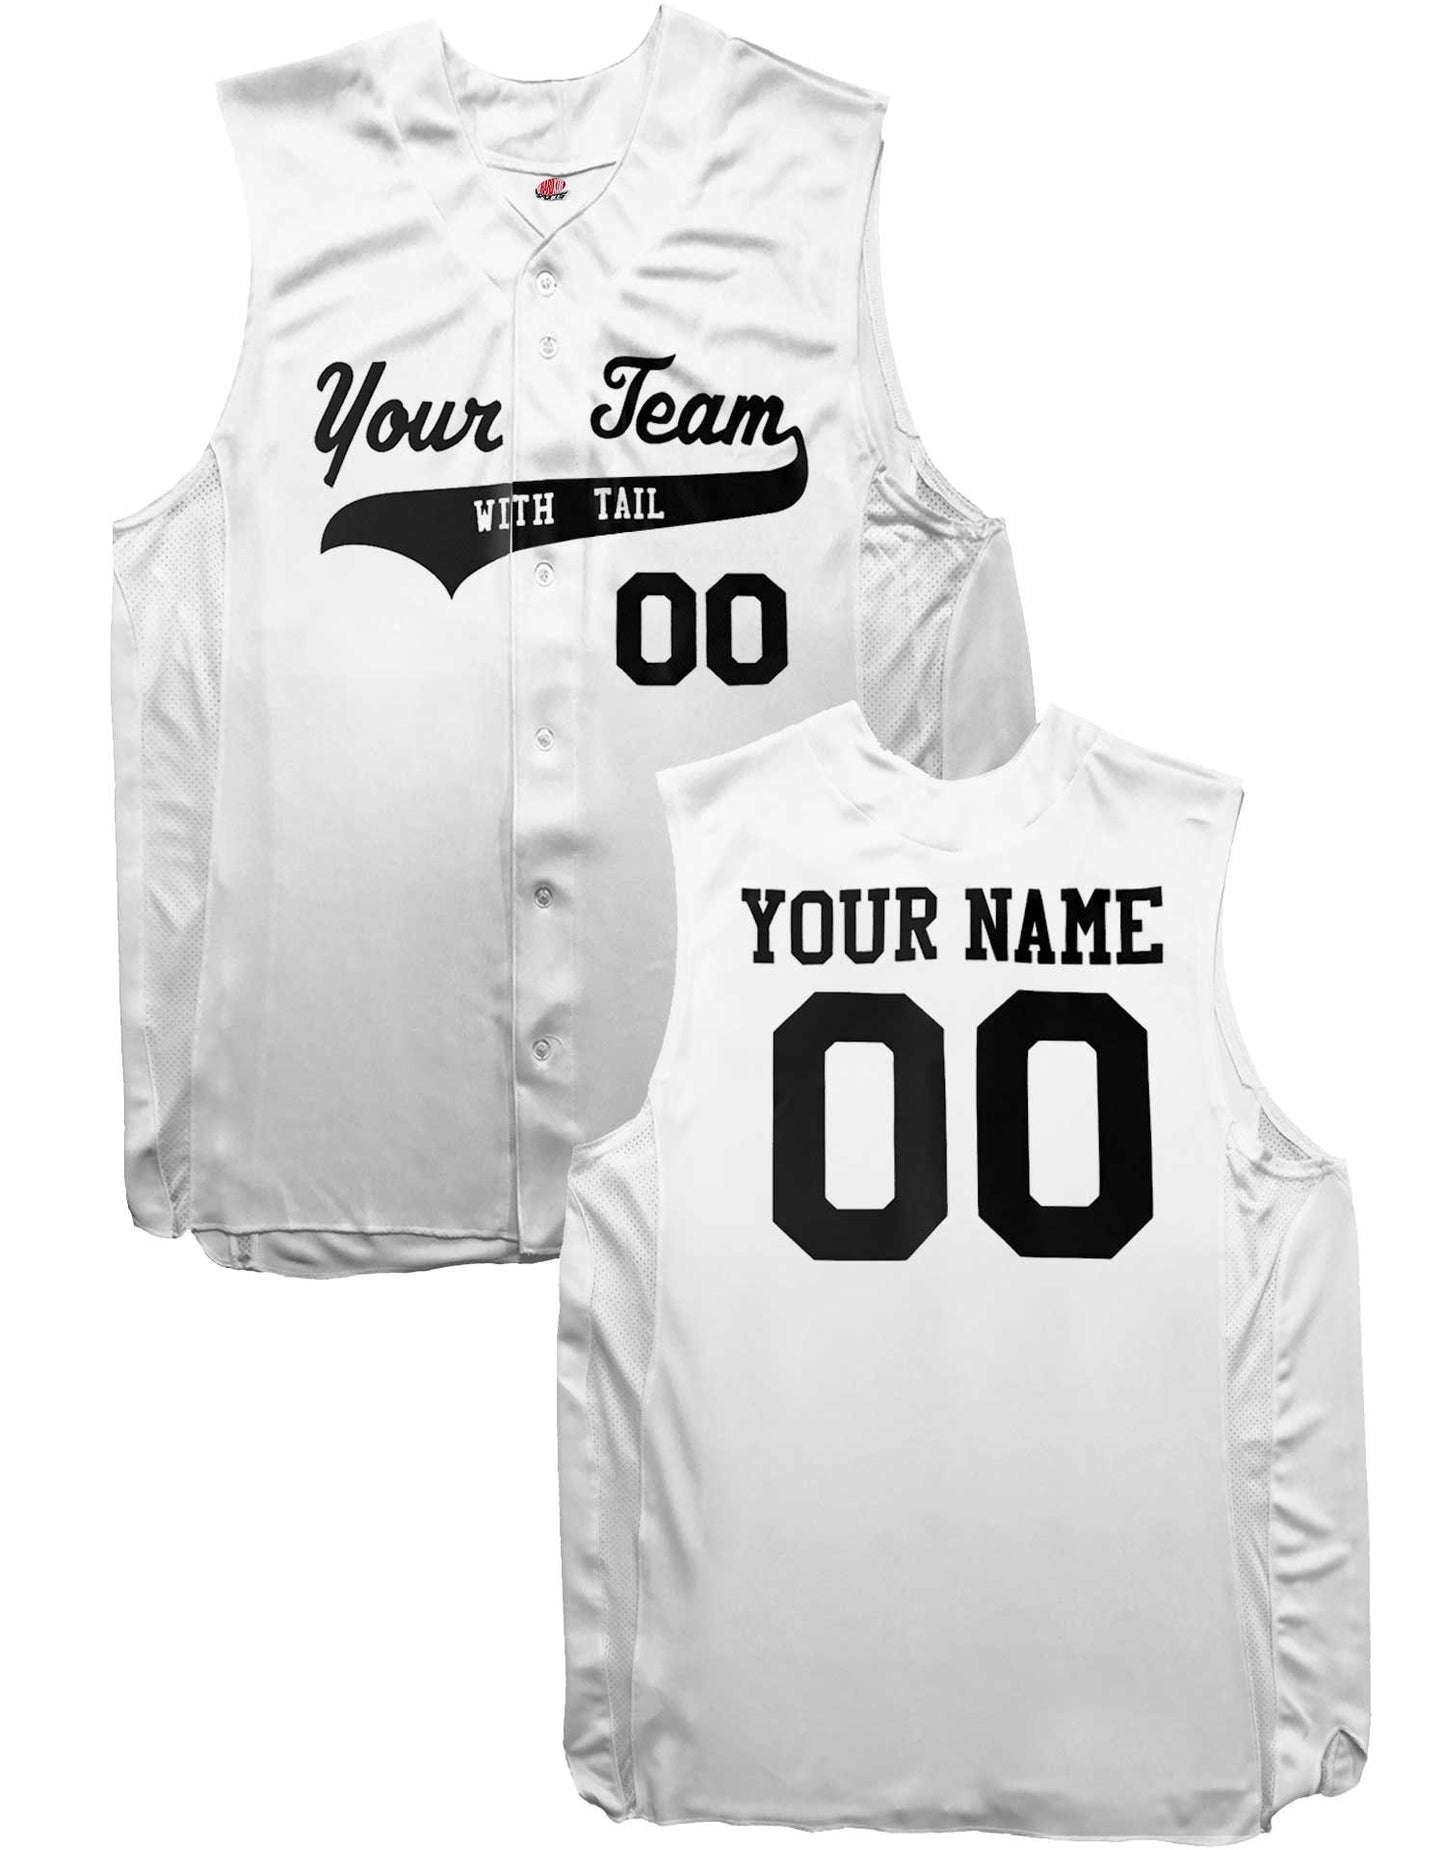 Solid Color 6 Button Double Knit Sleeveless Baseball Jersey| Custom Jersey with Team, Player, Numbers Black, White, Natural, Graphite, Grey